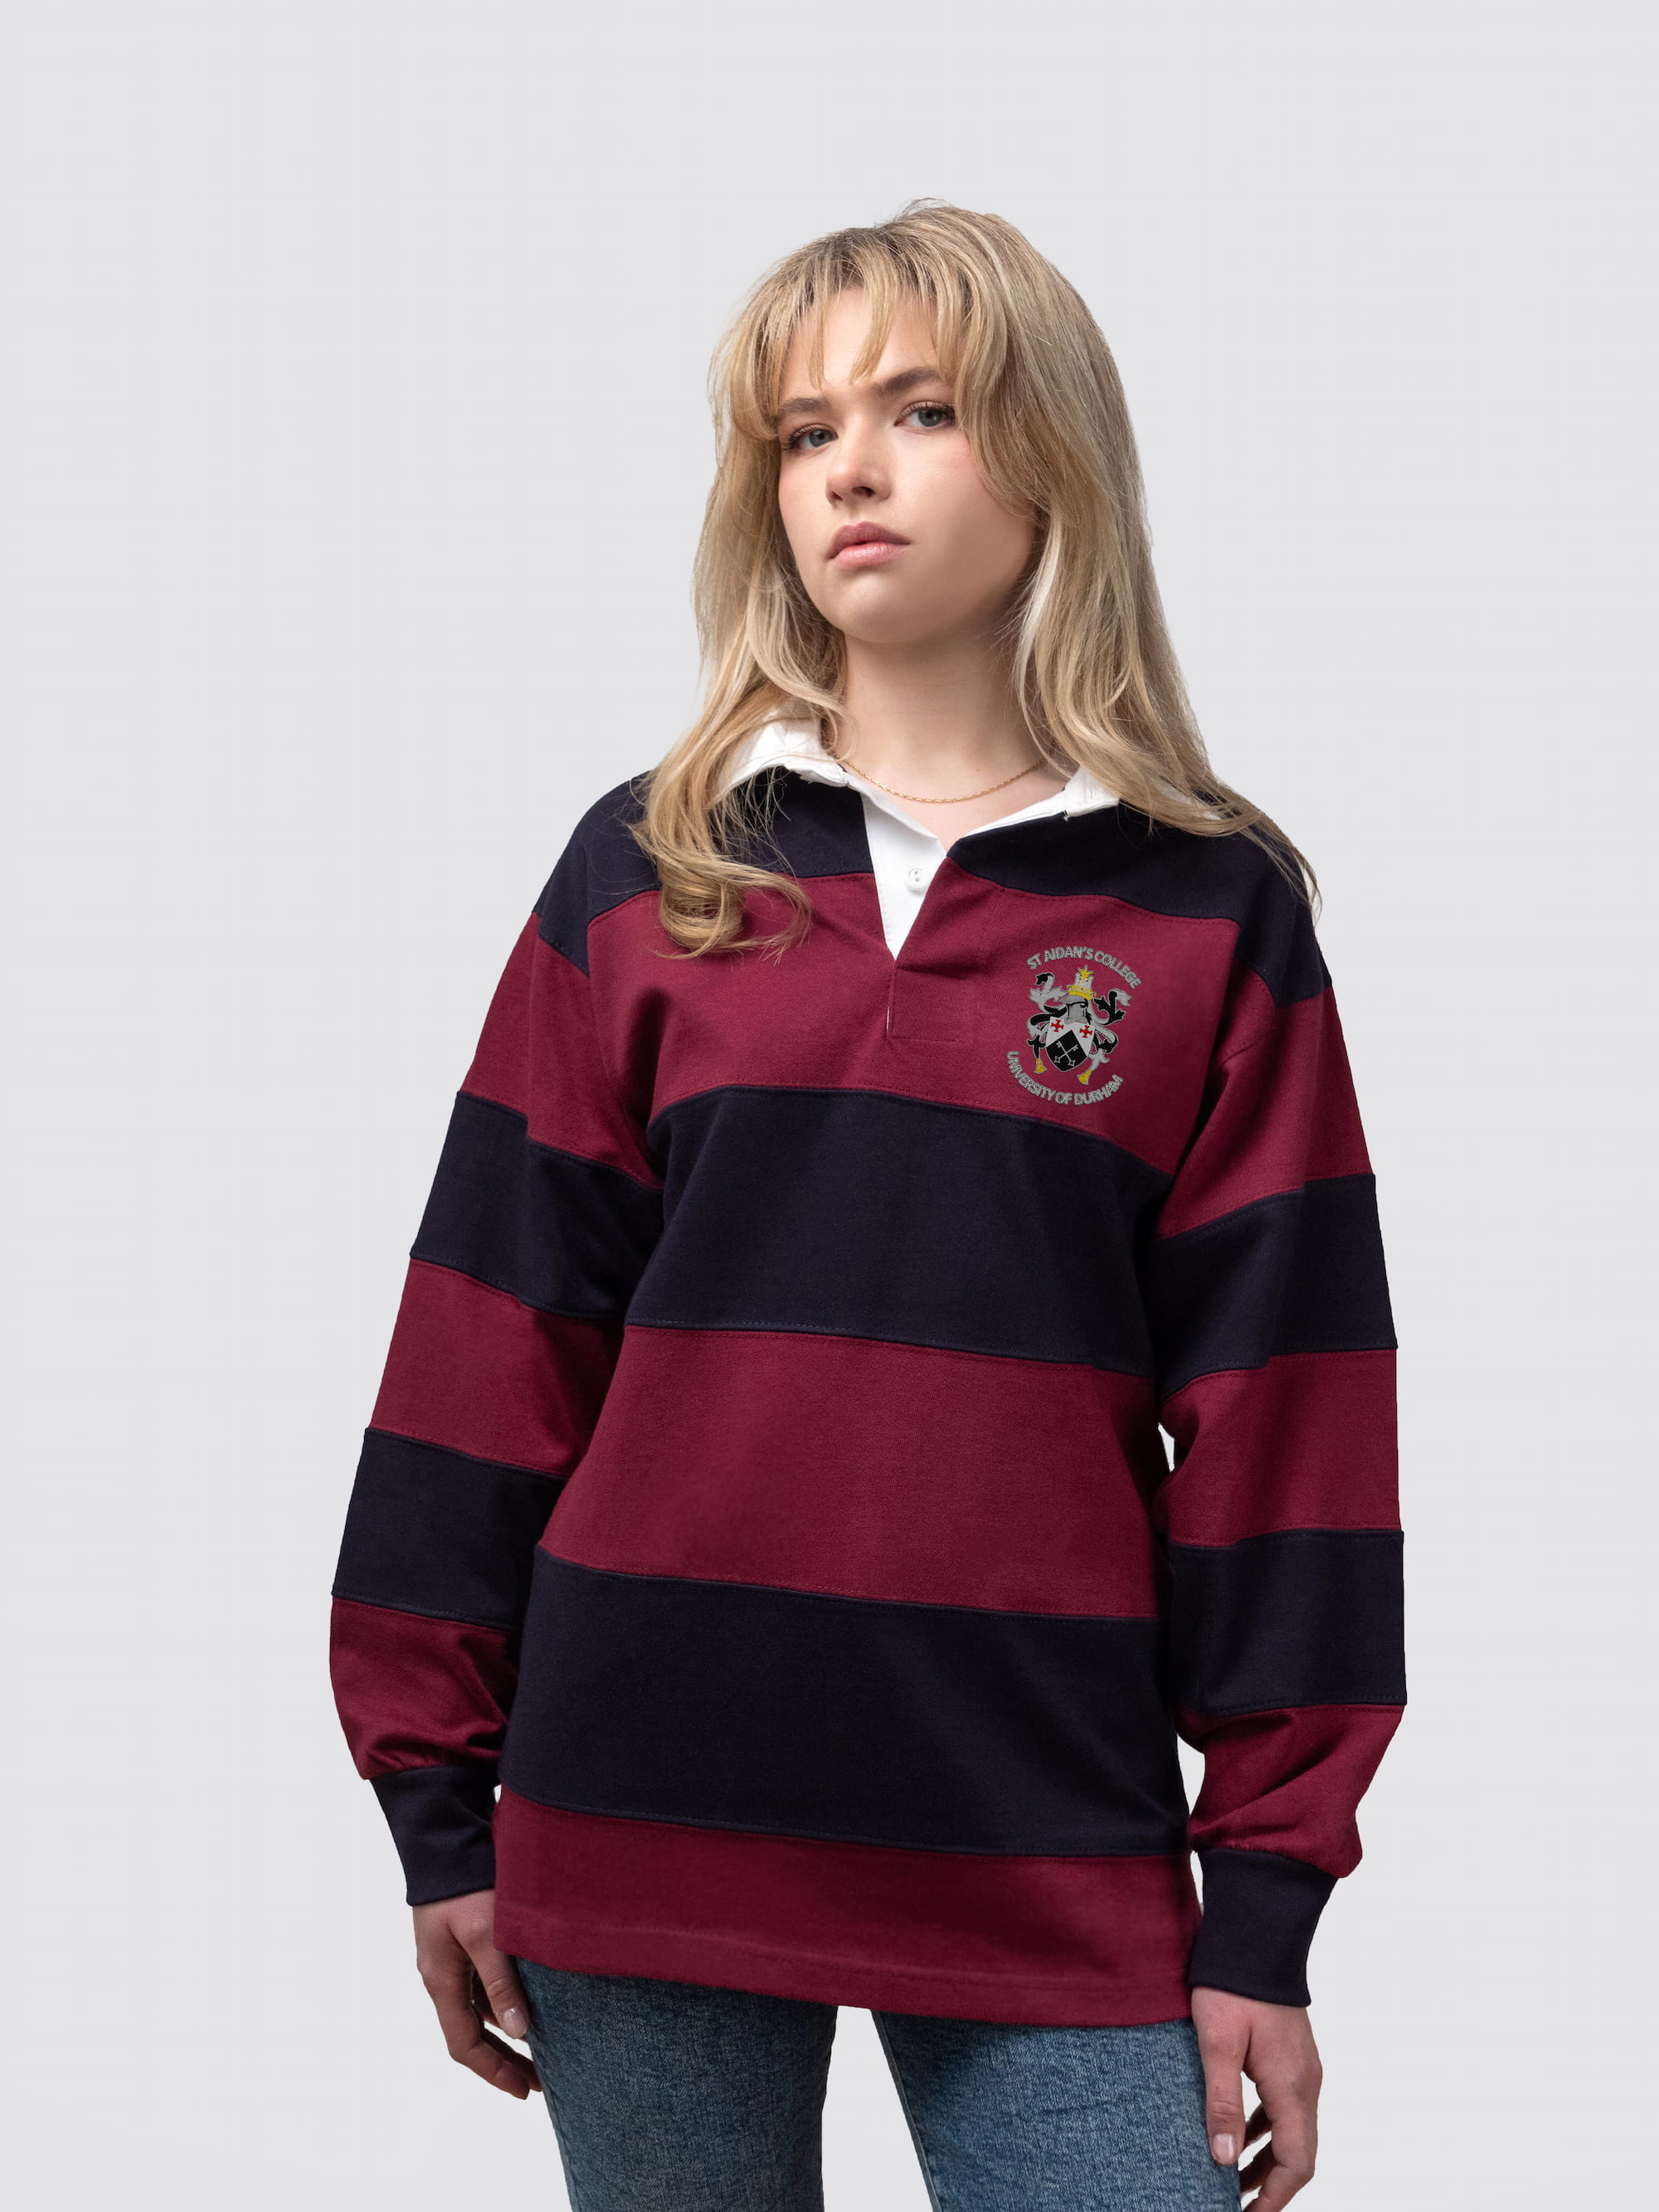 St Aidan's College rugby shirt, with burgundy and navy stripes